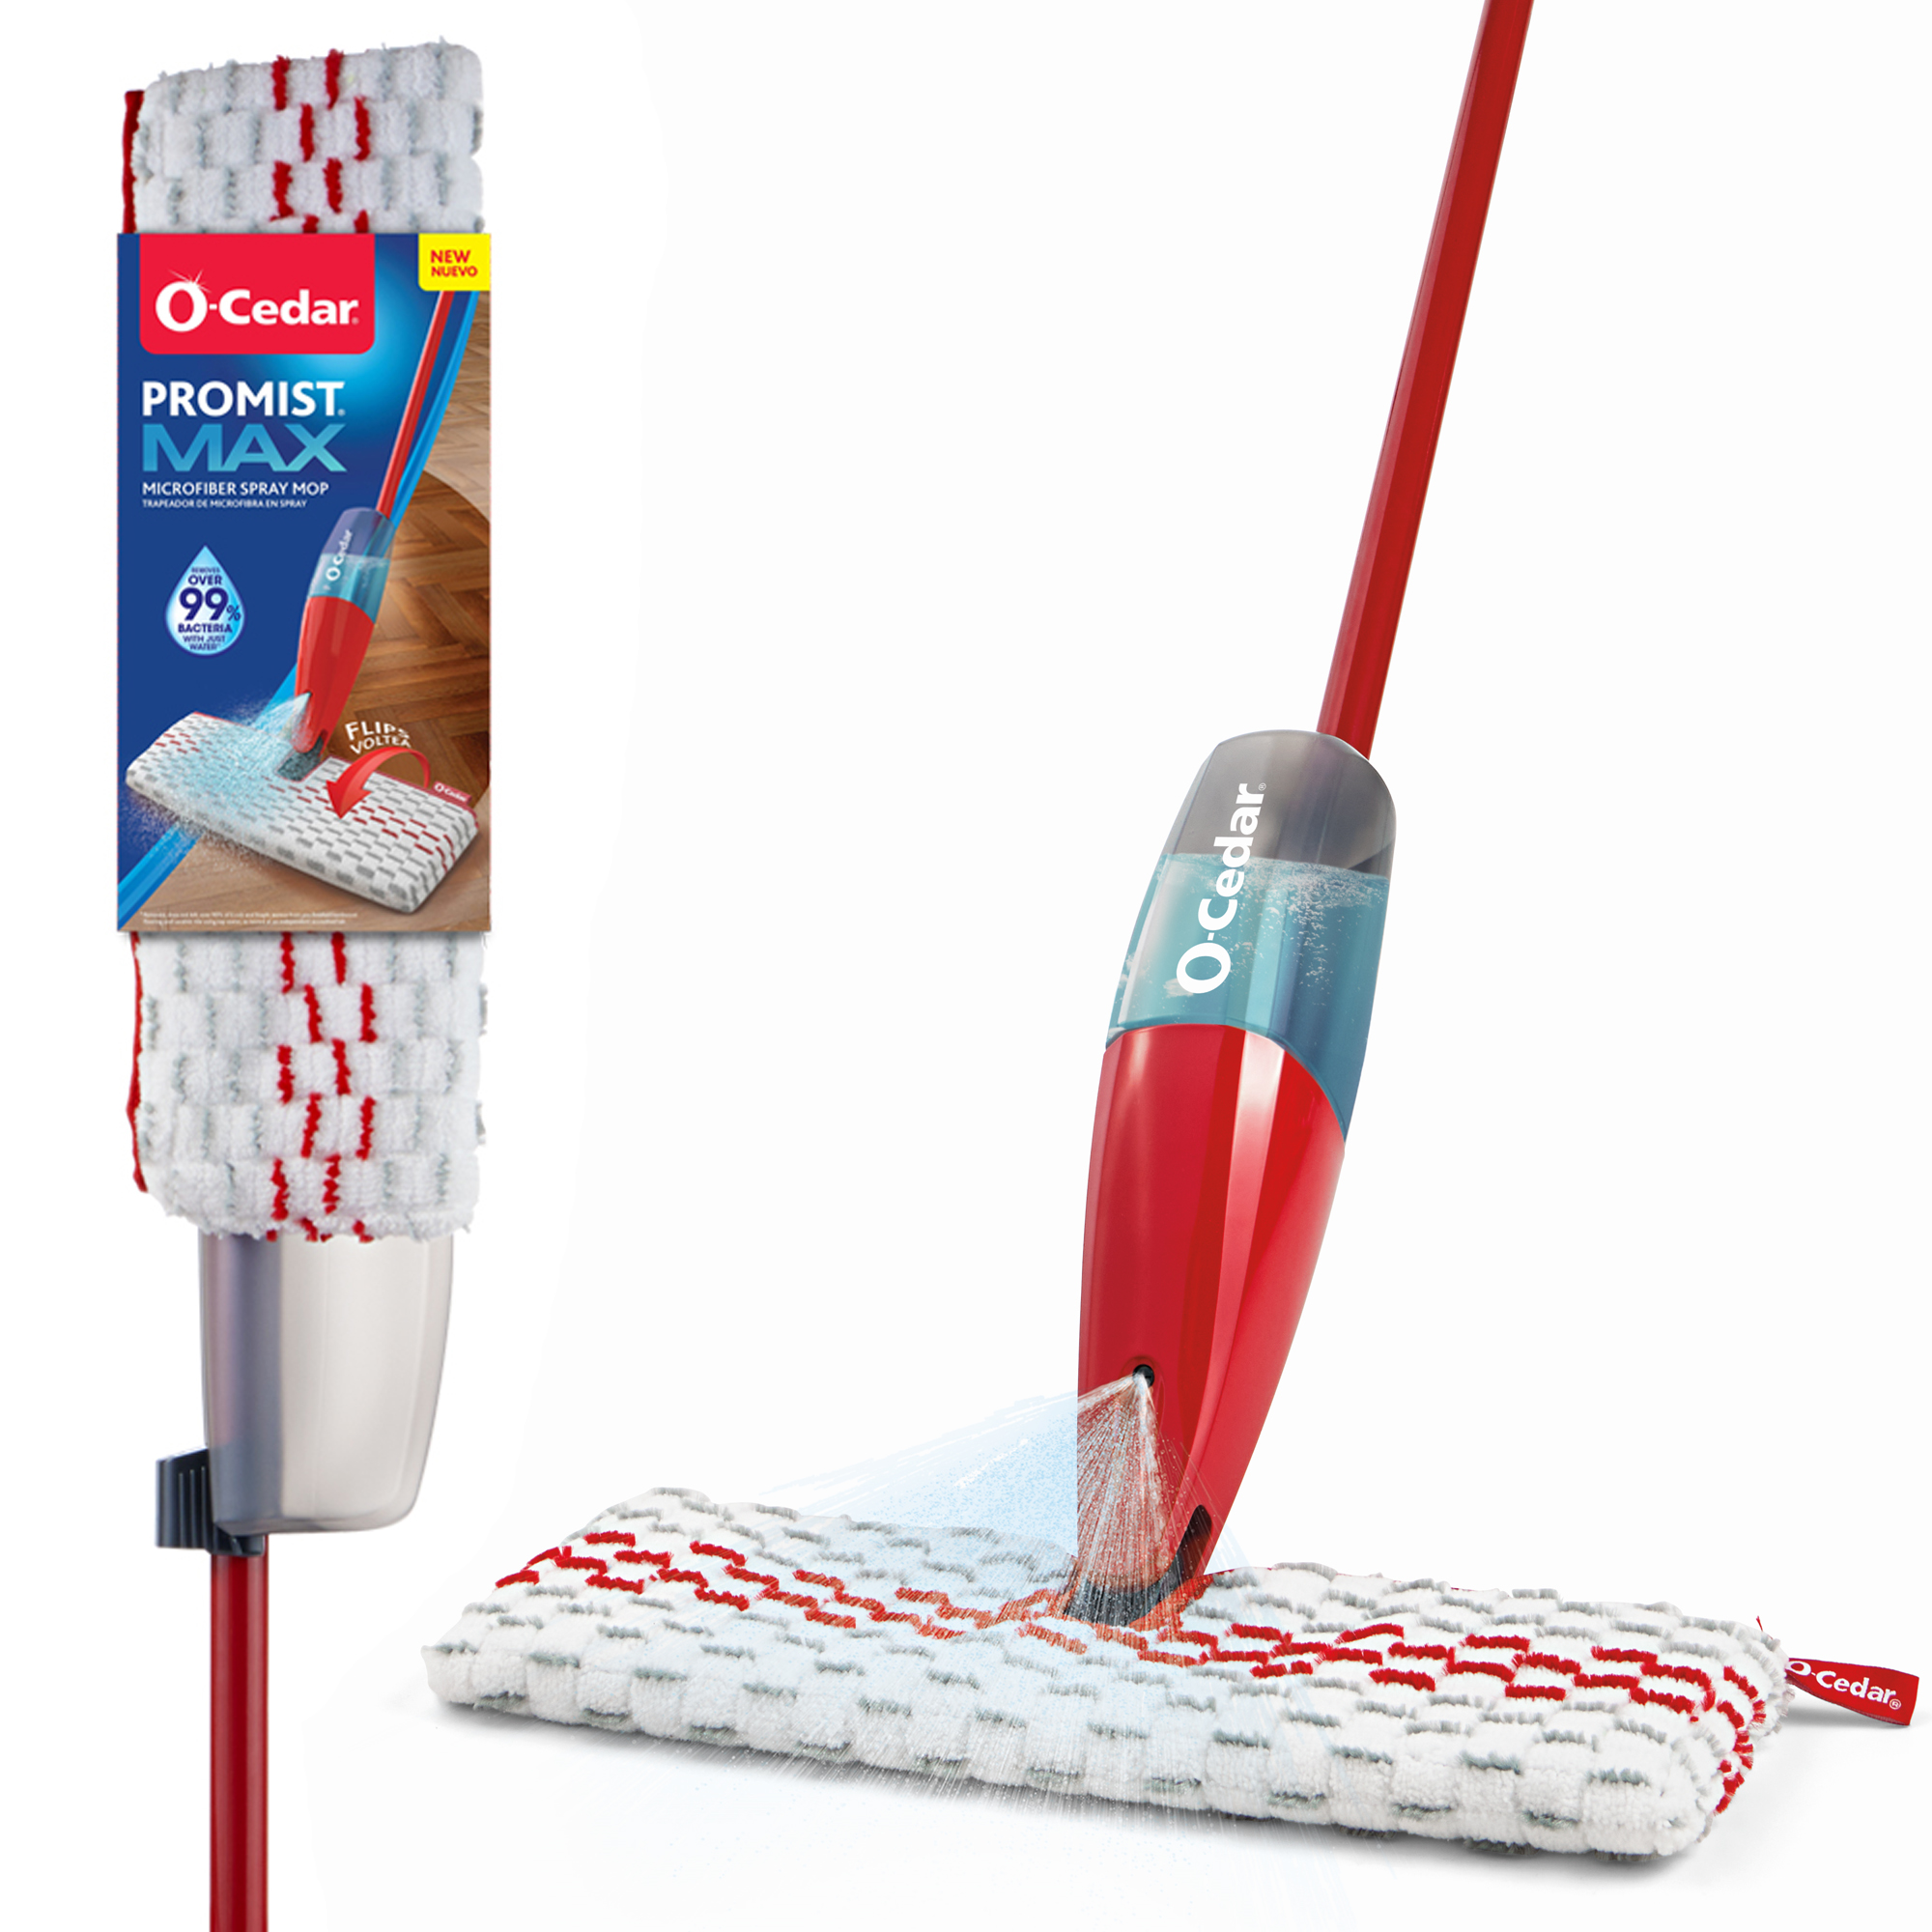 O-Cedar ProMist® MAX Microfiber Spray Mop, Reusable and Machine Washable Mop Pad - image 1 of 21